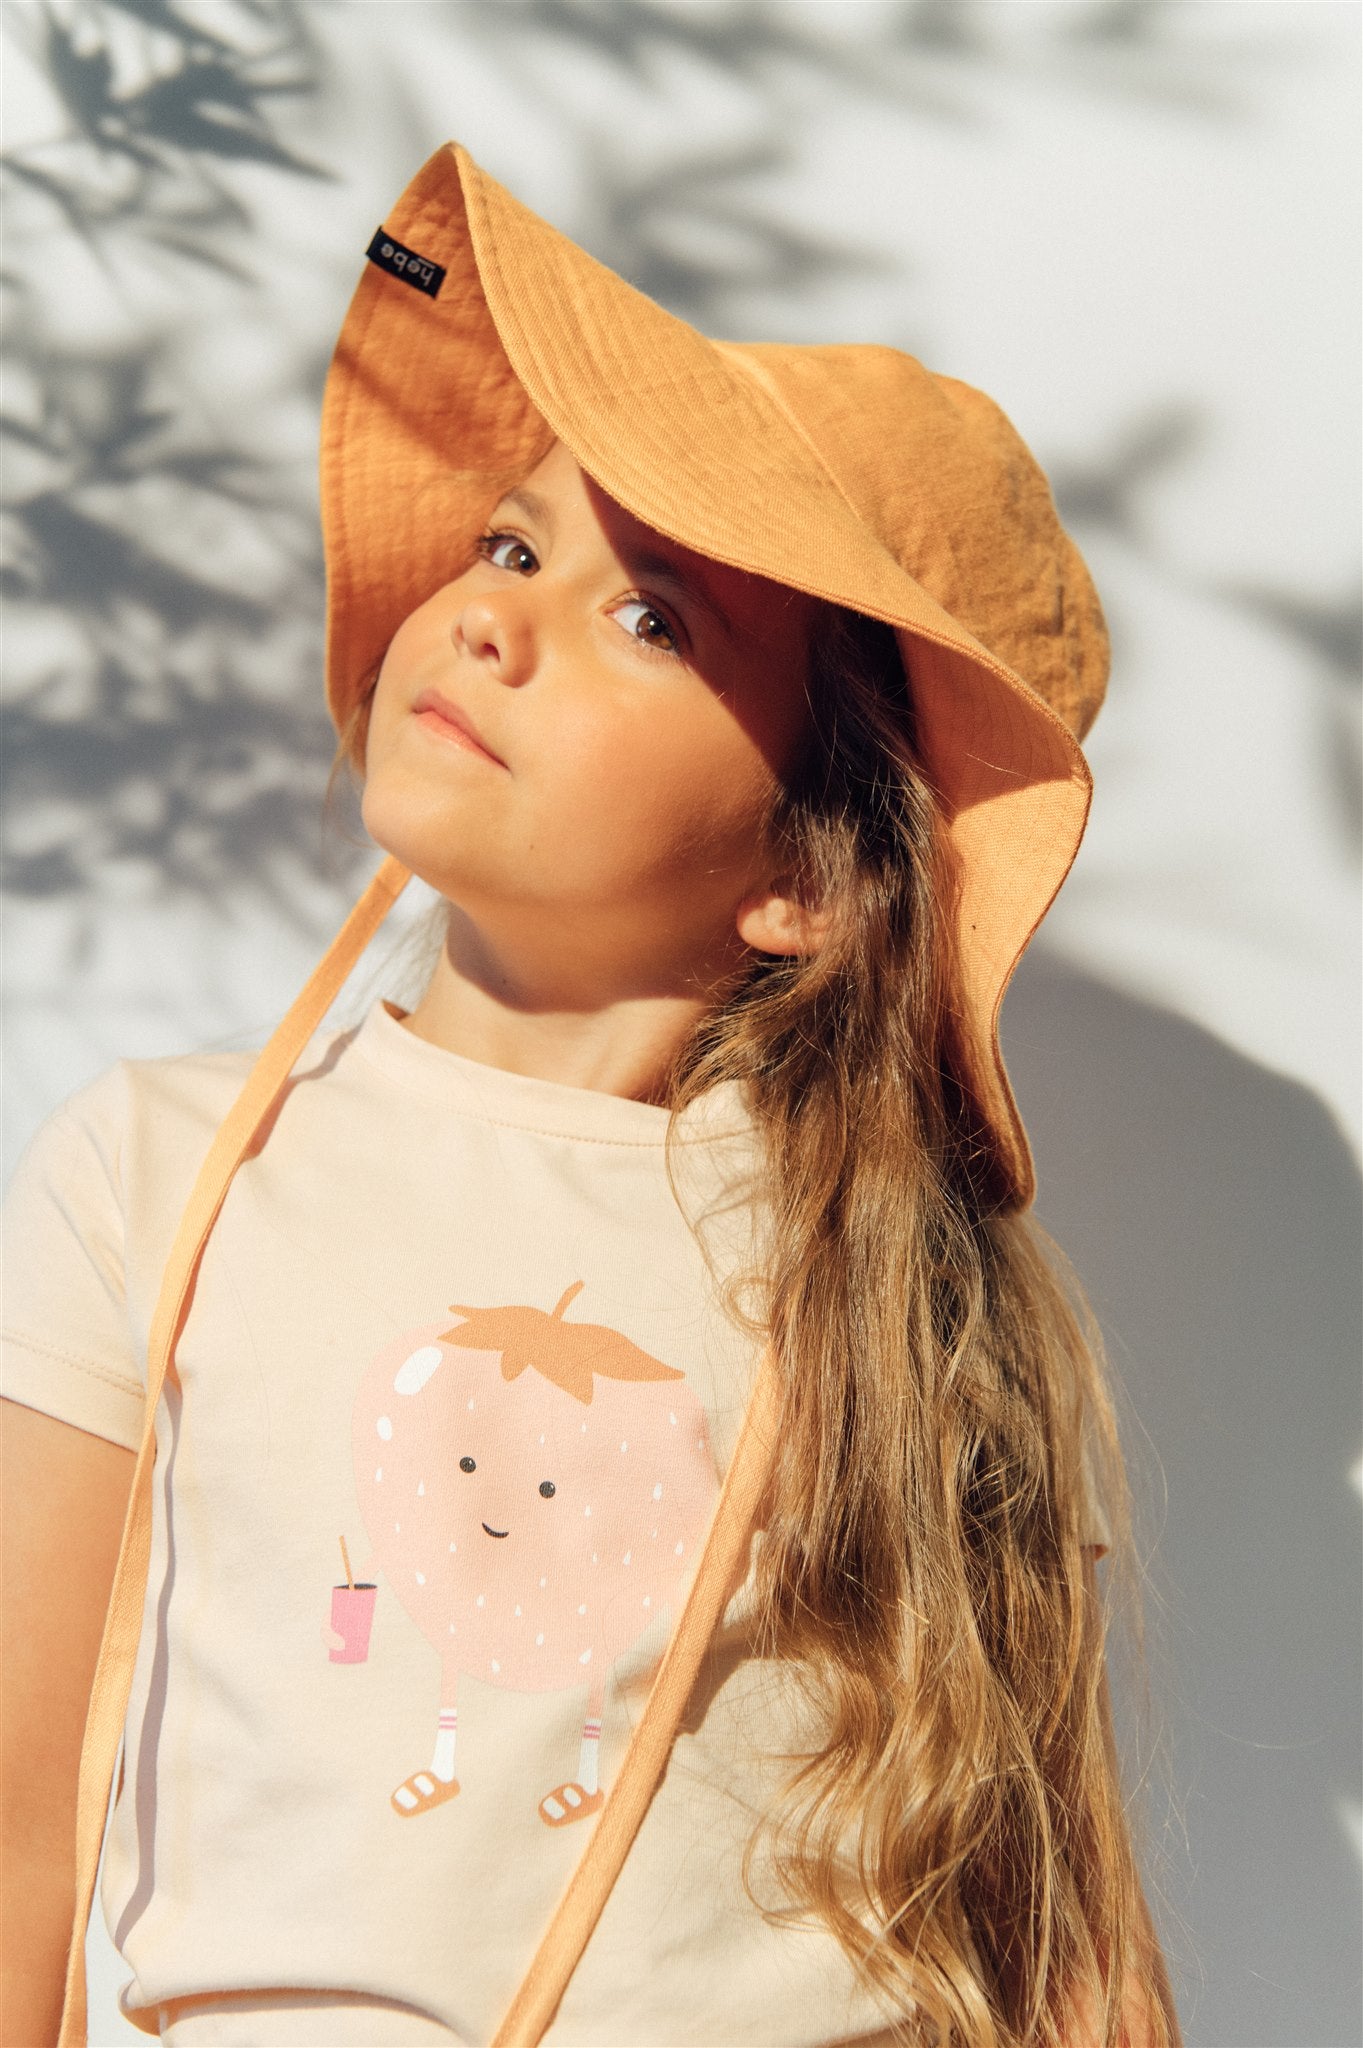 Shop breathable and stylish linen girl's sun hat in organge colour for summer and also for sun protection. Made from high-quality European linen without any harmful chemicals by Hebe in fair trade. MiliMilu offers sustainable kids' fashion and accessories Hong Kong and Singapore's best girls' summer hats.